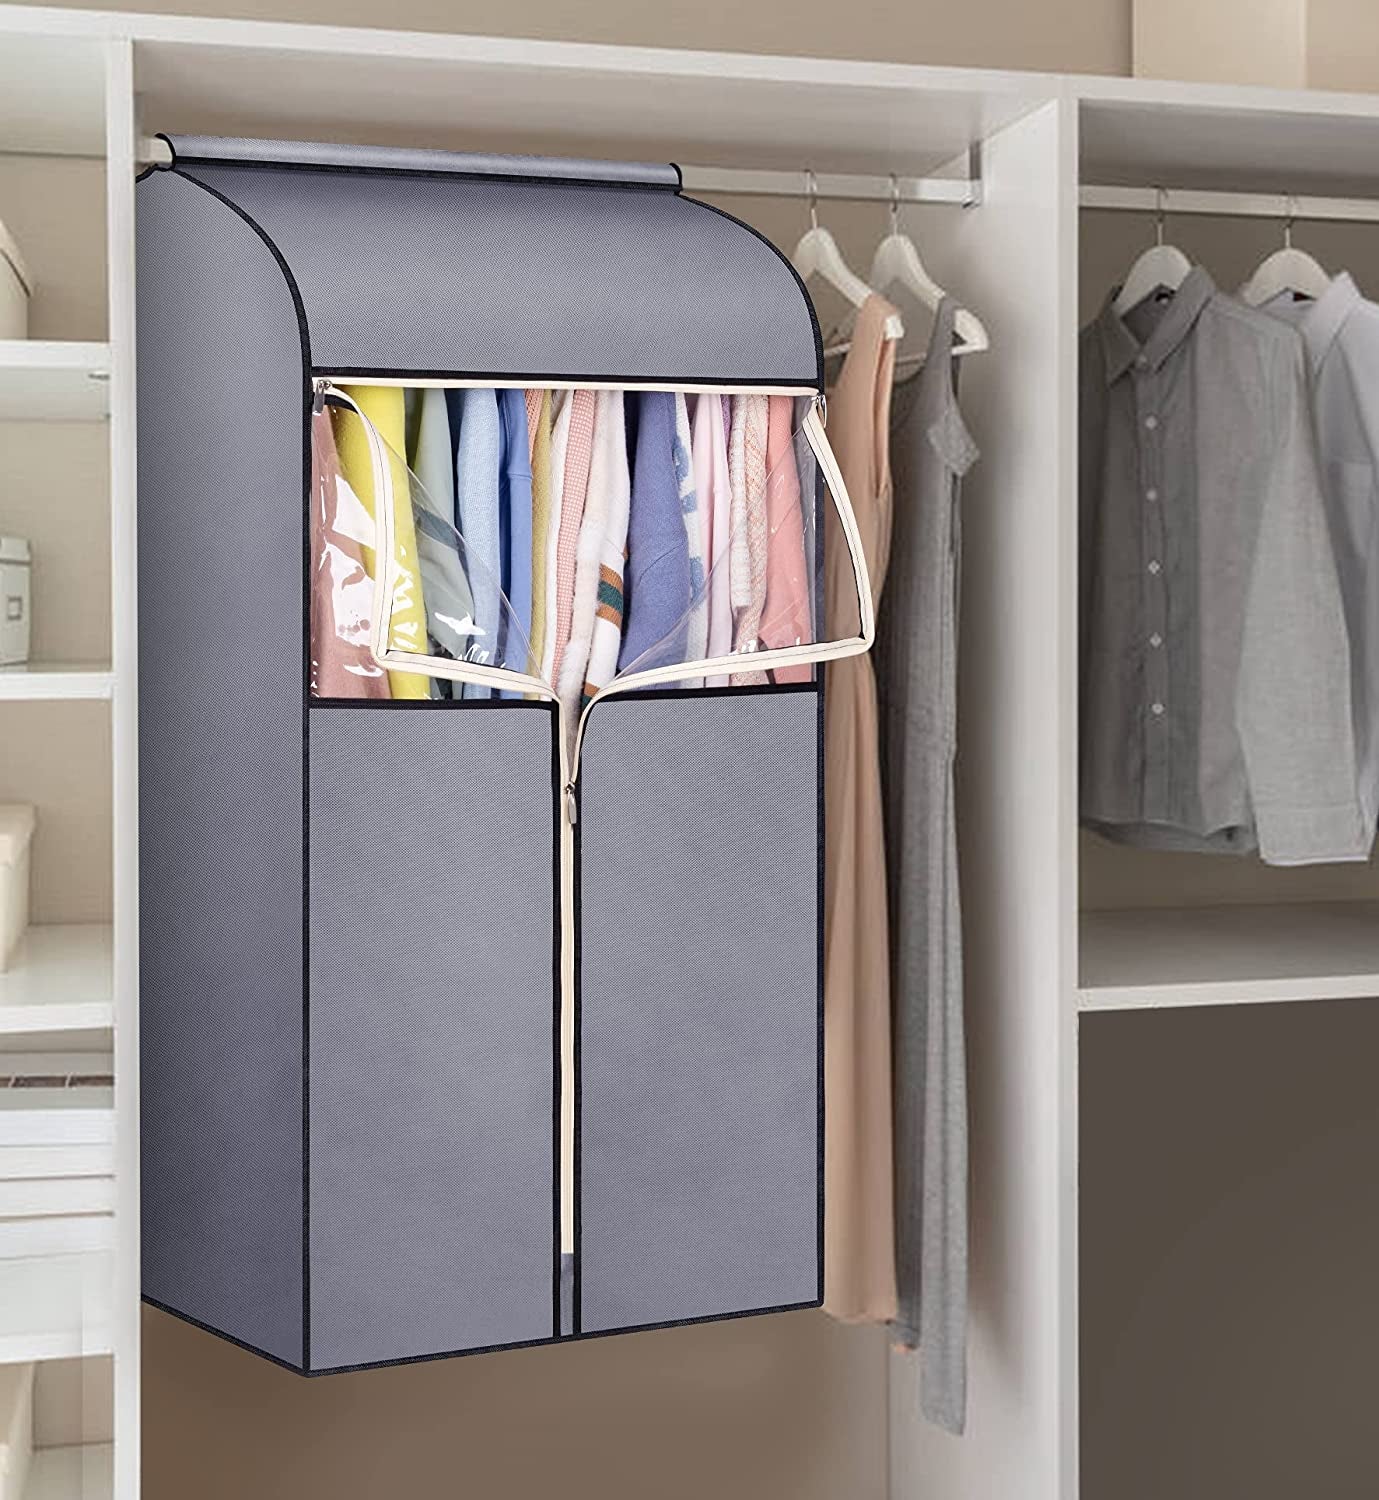 43” Hanging Clothes Storage Coat Covers Garment Bags Dustproof Dress Jackets Protector for Wardrobe Cover Rack with Clear Window